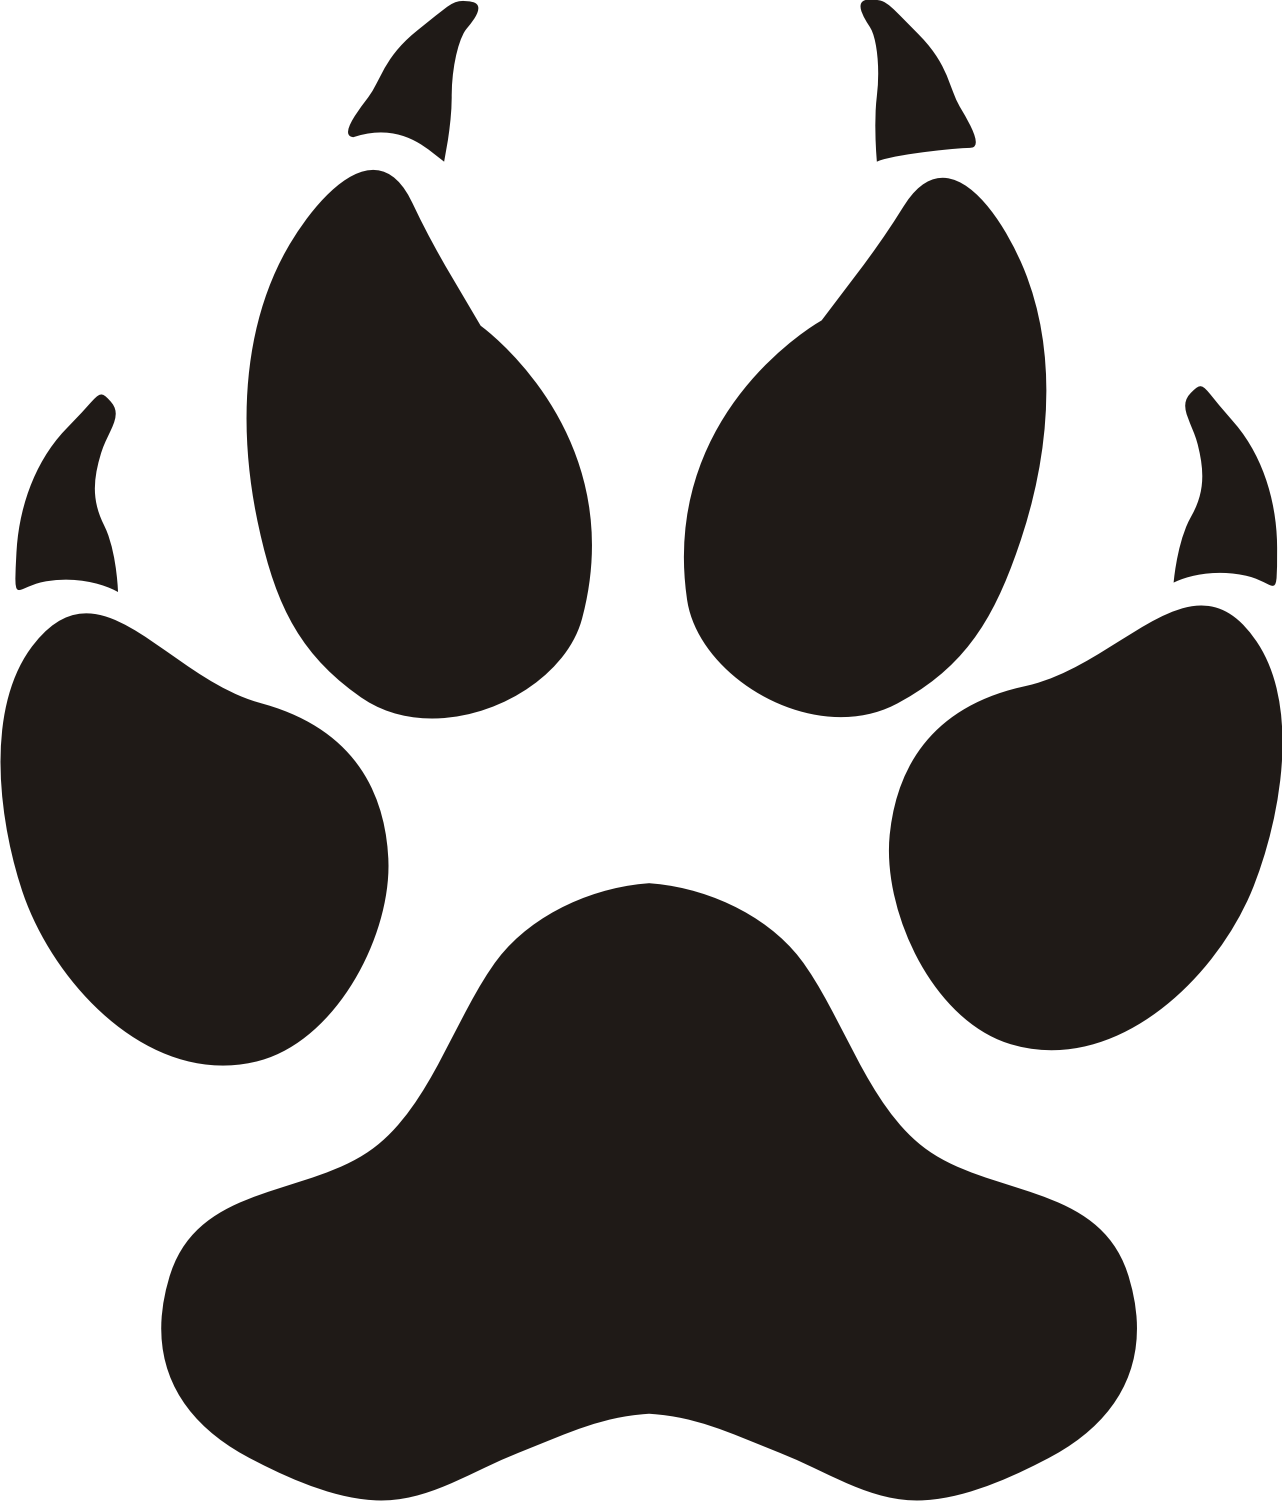 Panther Paw Prints Clip Art Pets For UPets For U | findanimal.